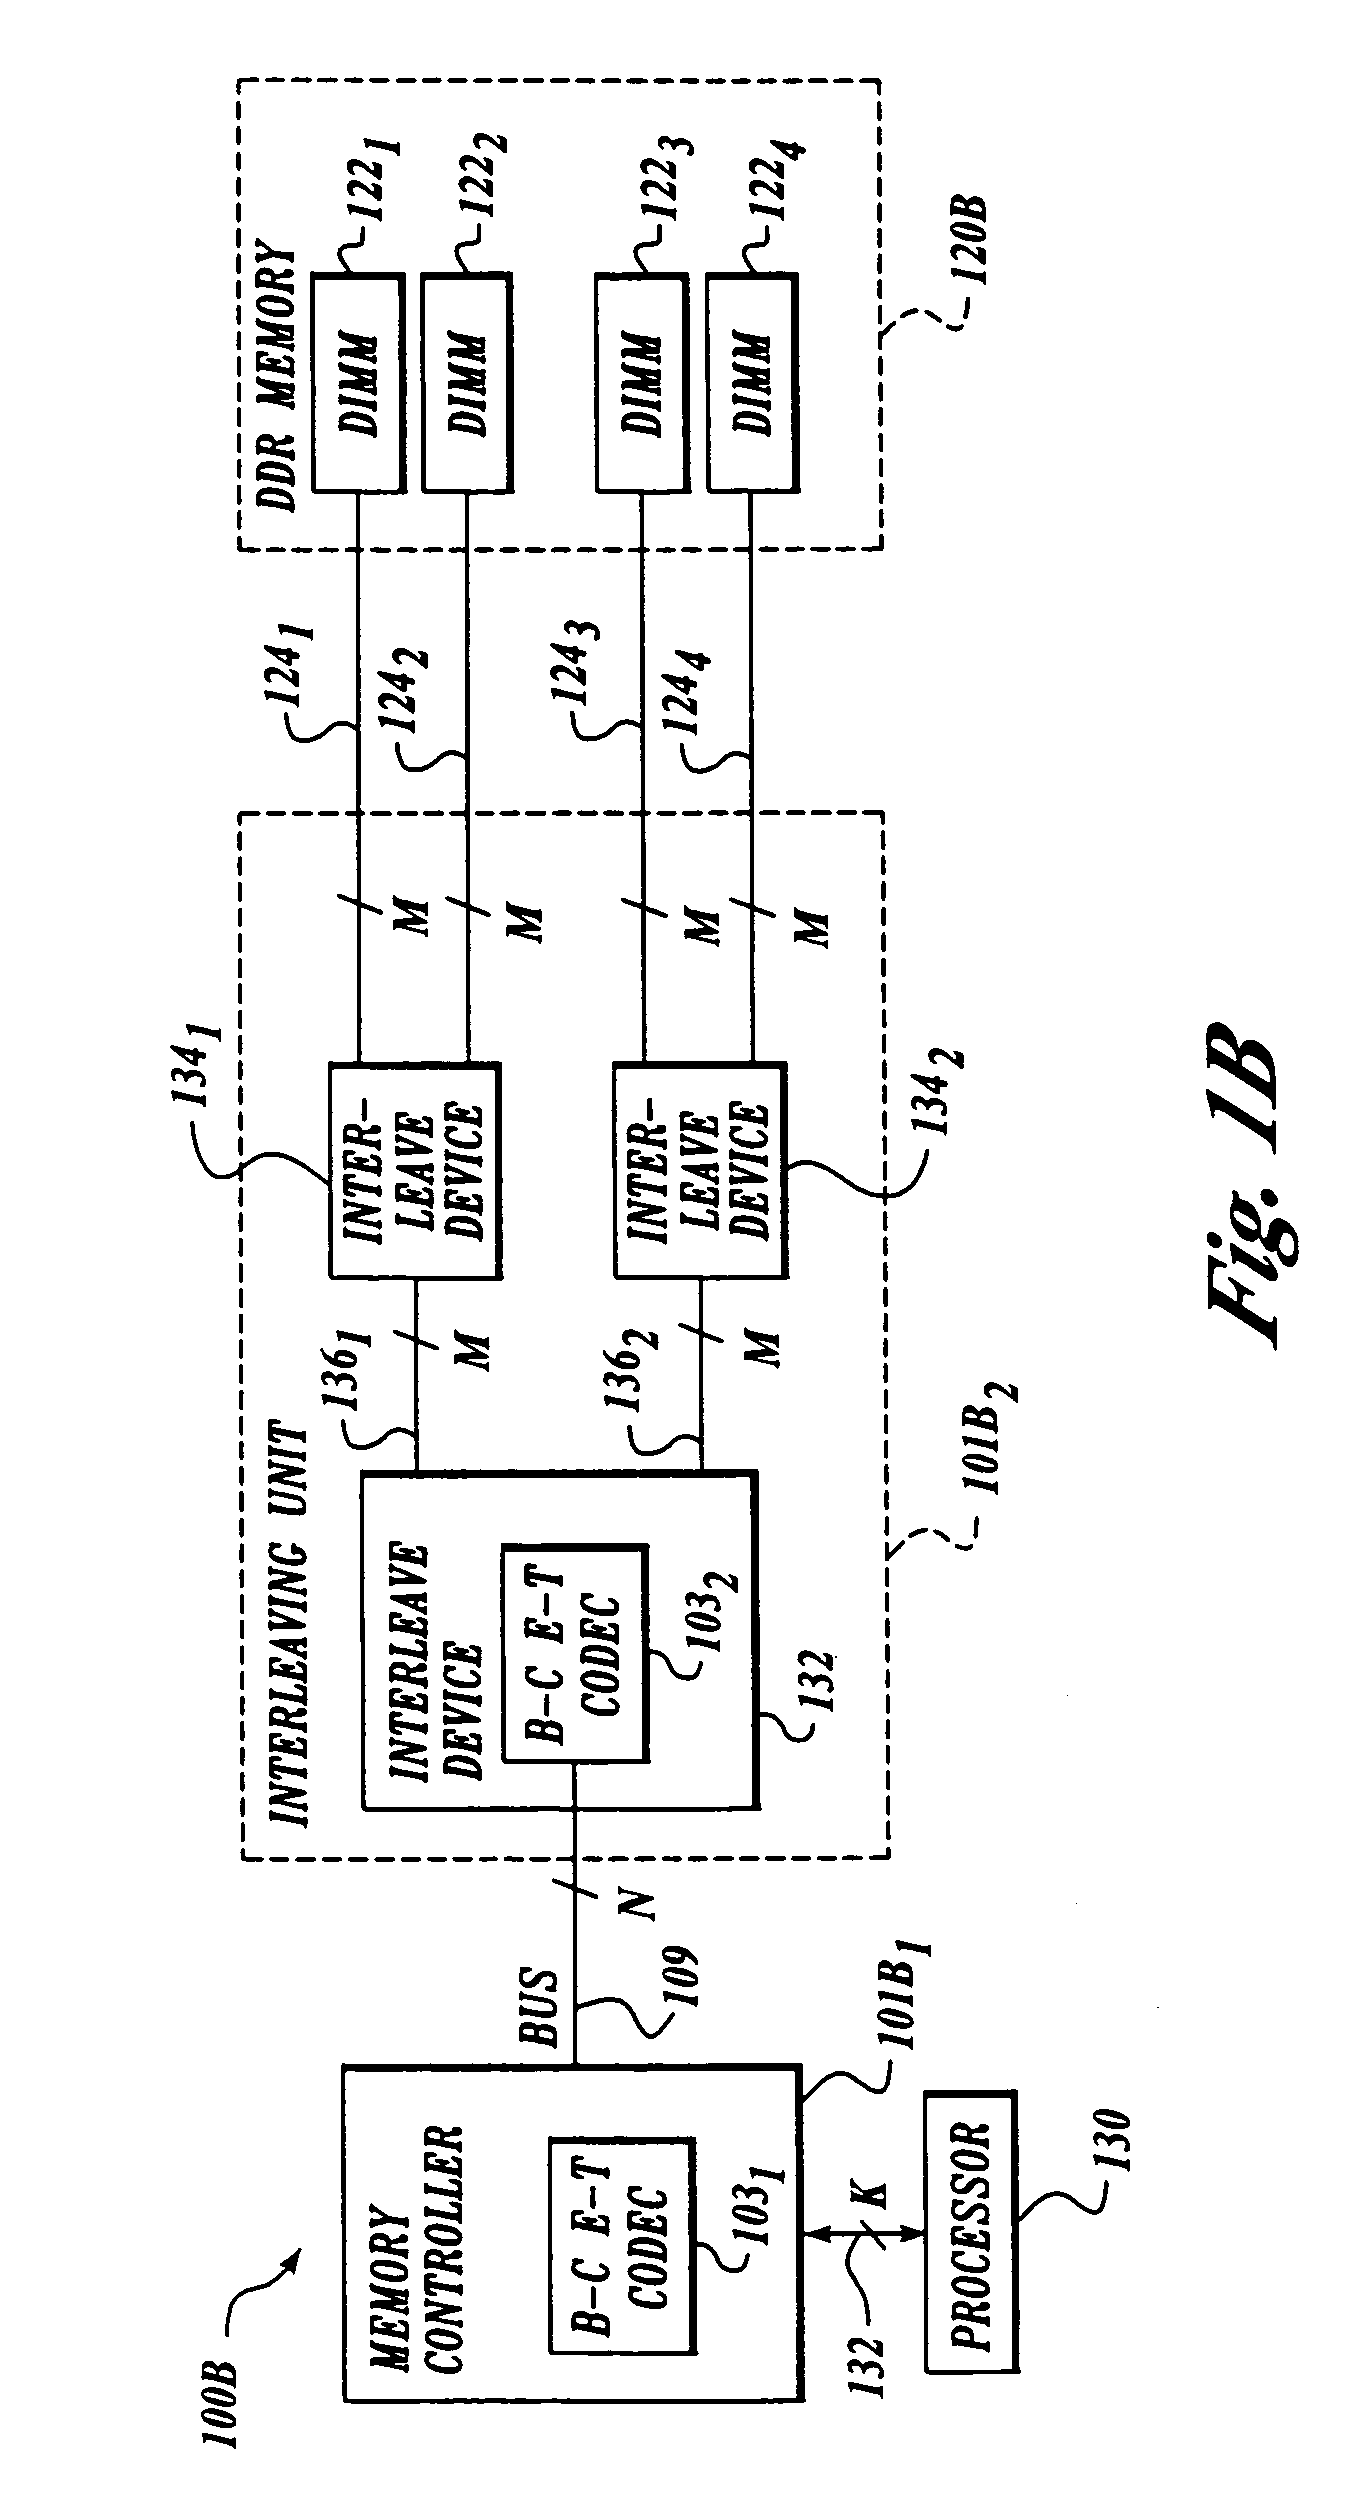 Single-ended balance-coded interface with embedded-timing